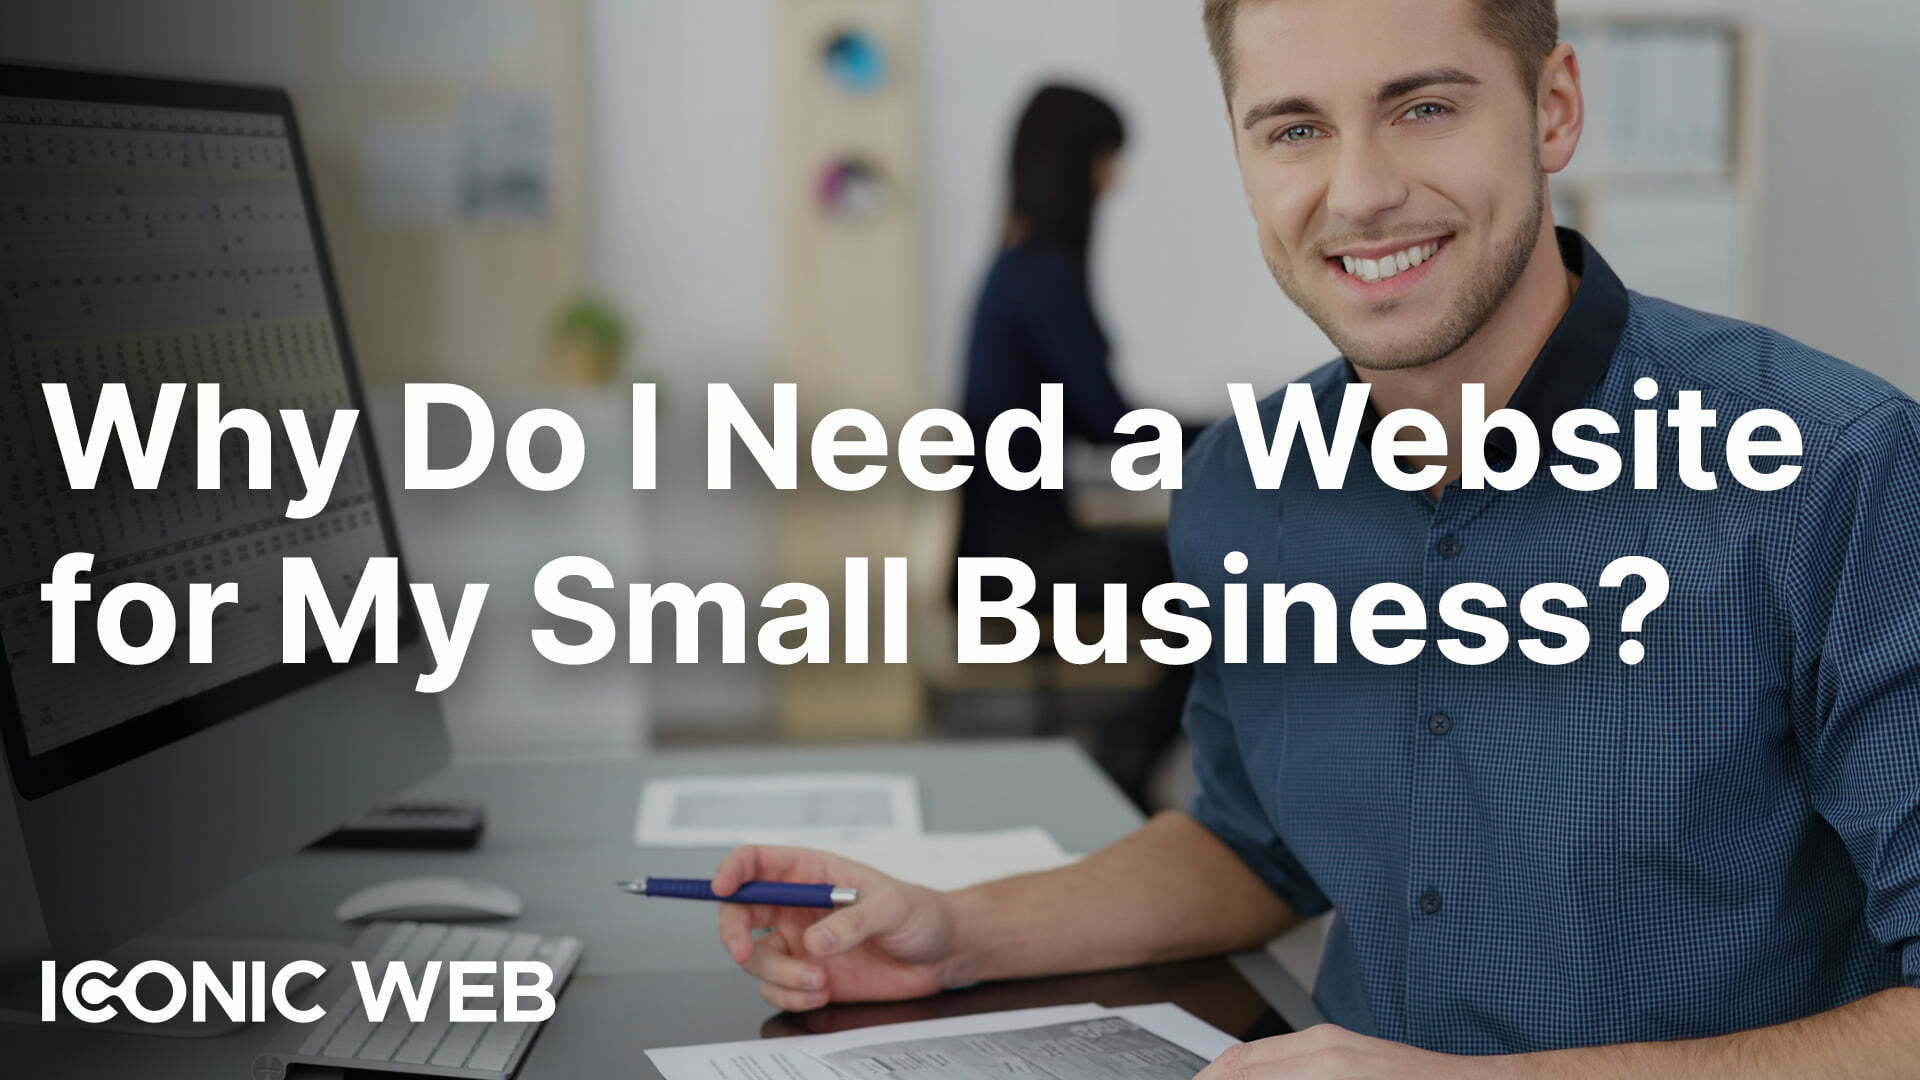 Why Do I Need a Website for My Small Business